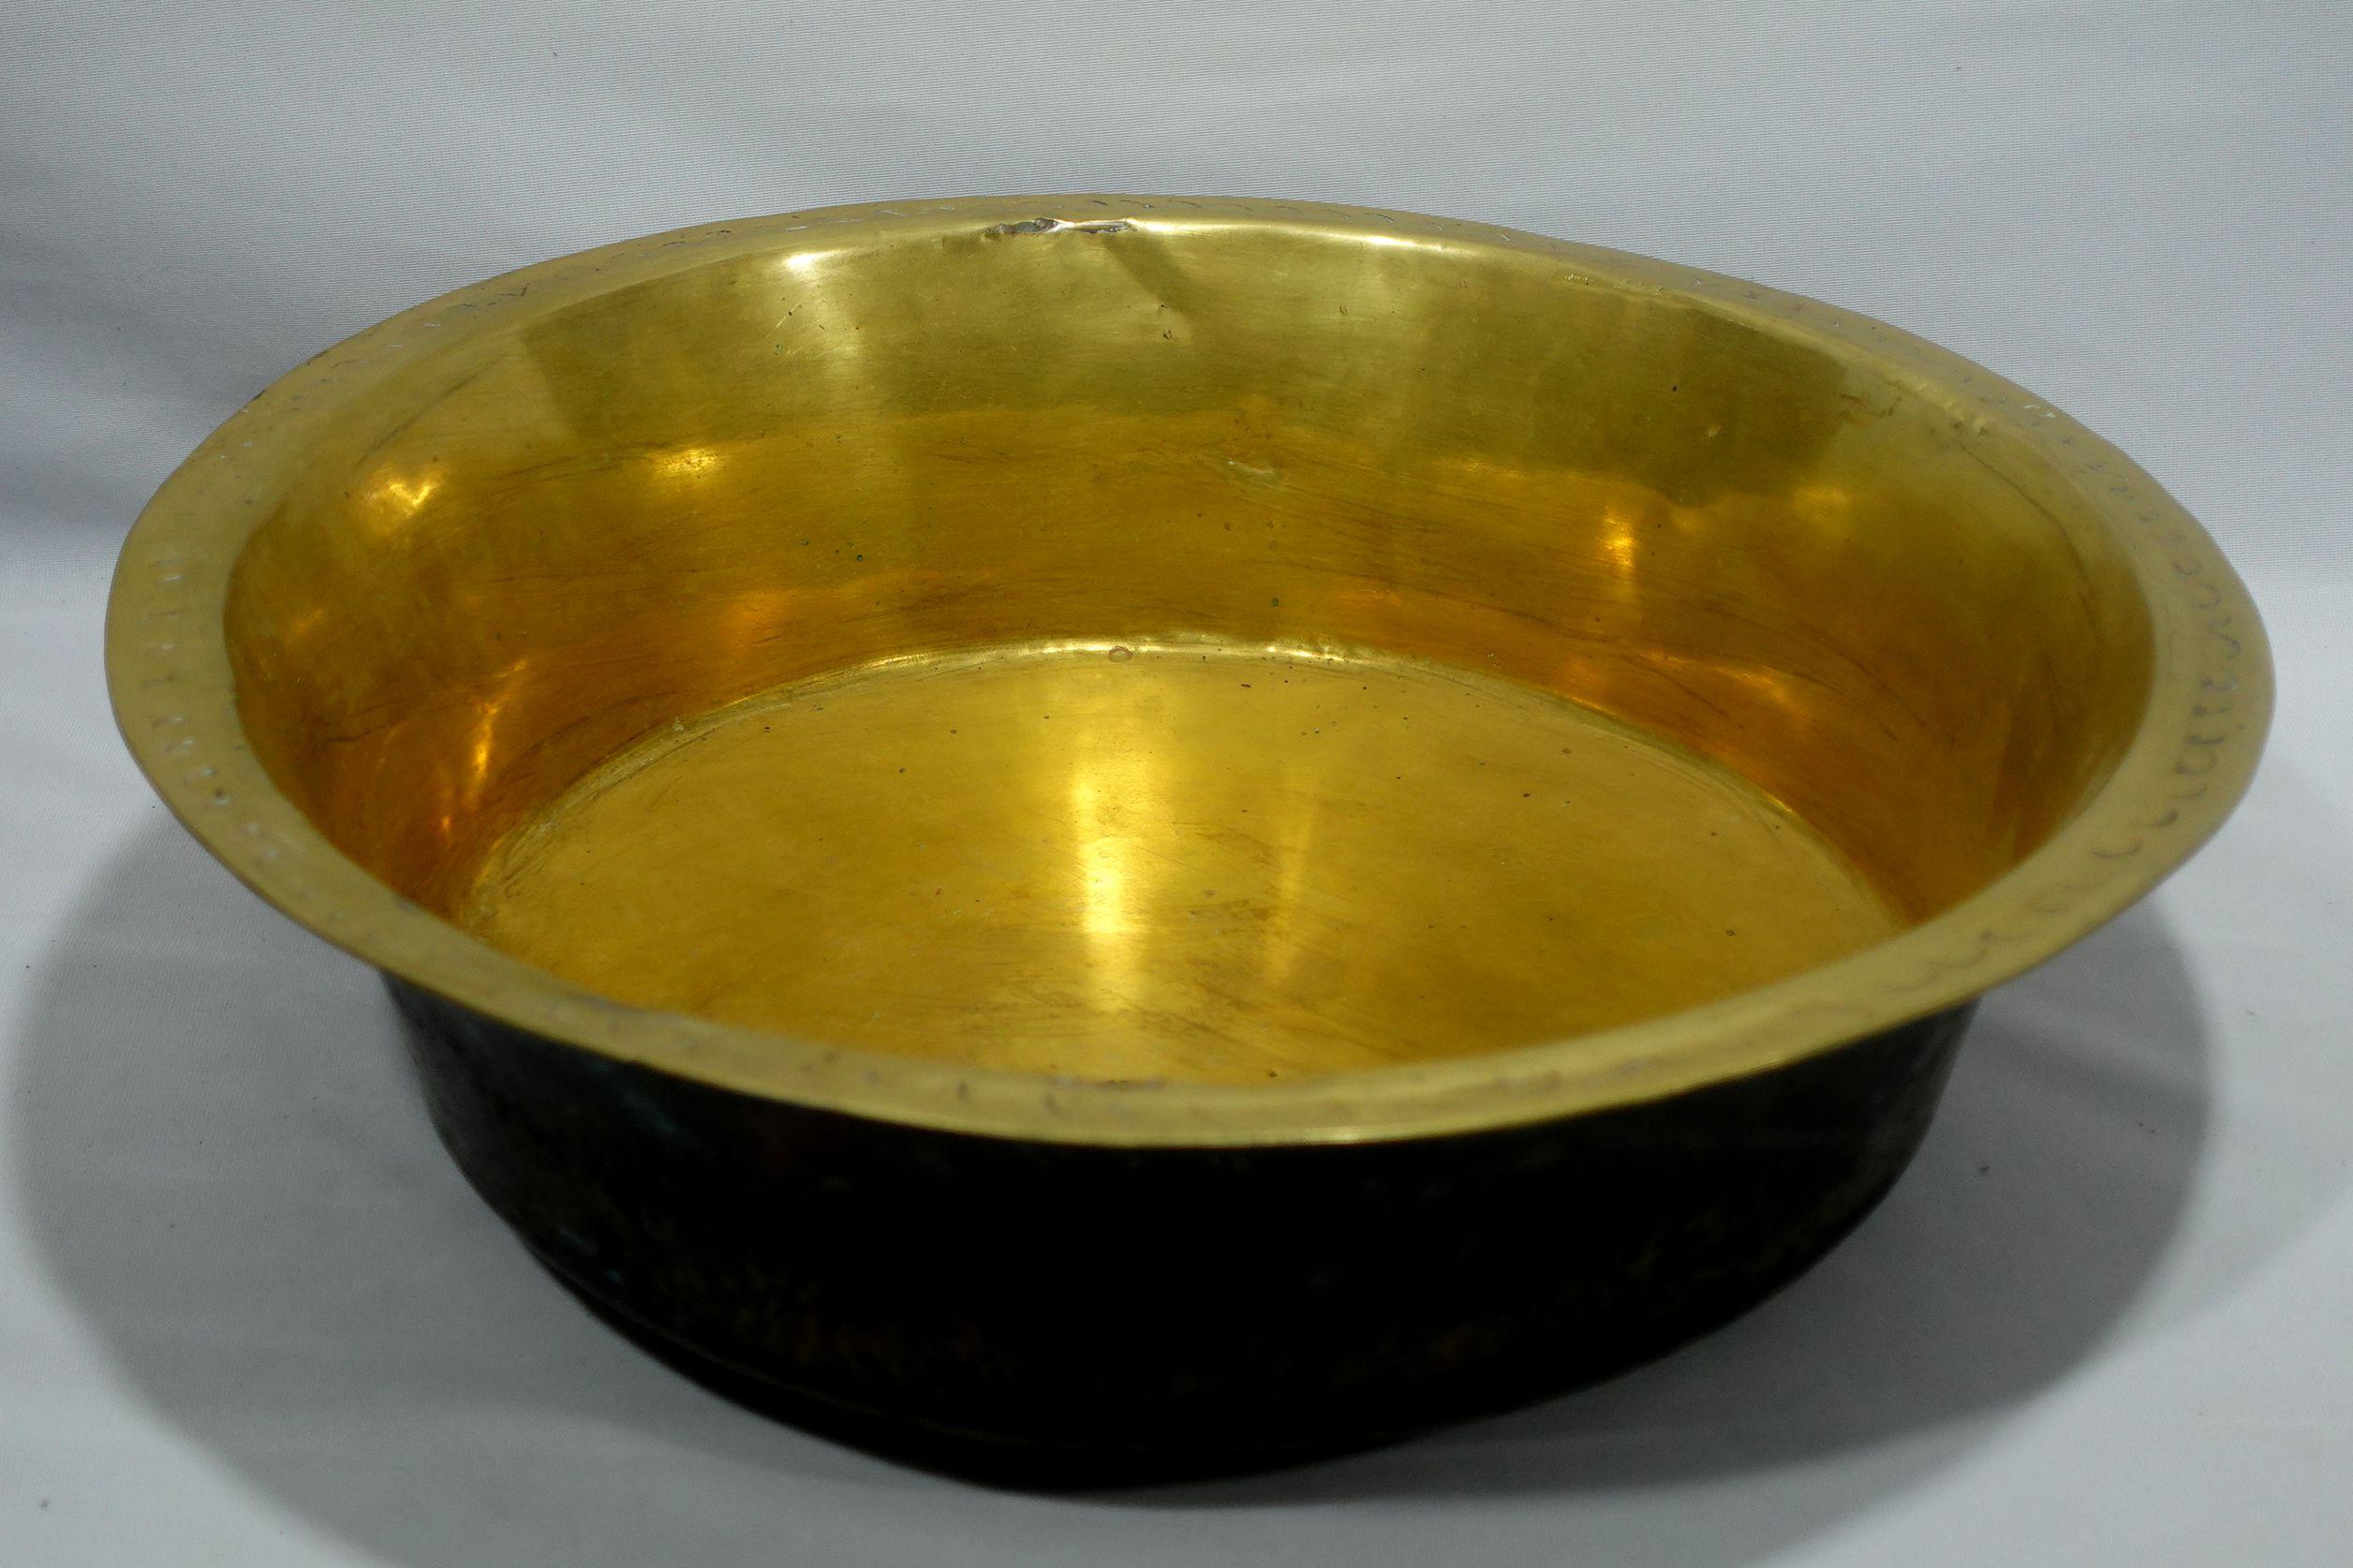 This is a large and old brass basin, absolutely 100% hand-hammered brass made from the 18th century in British. It is a scarce item and a lovely classical form.
